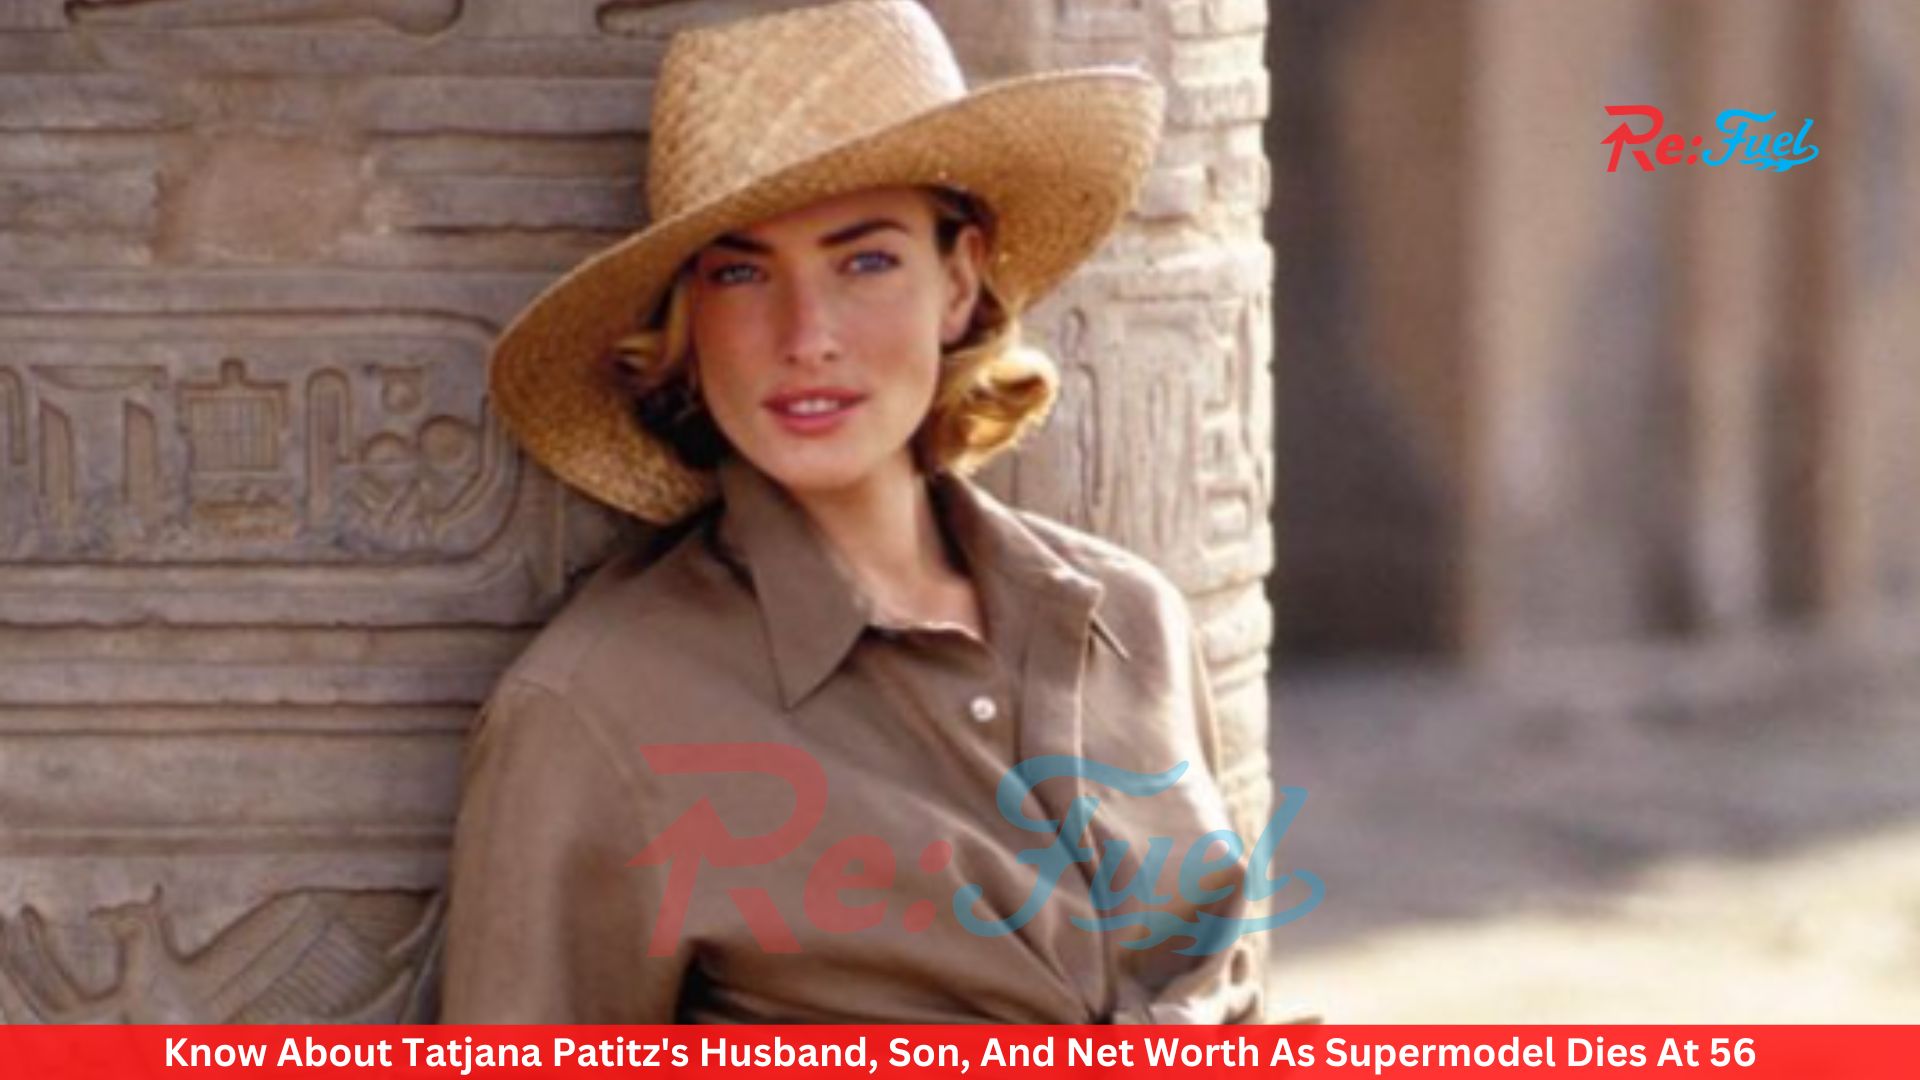 Know About Tatjana Patitz's Husband, Son, And Net Worth As Supermodel Dies At 56